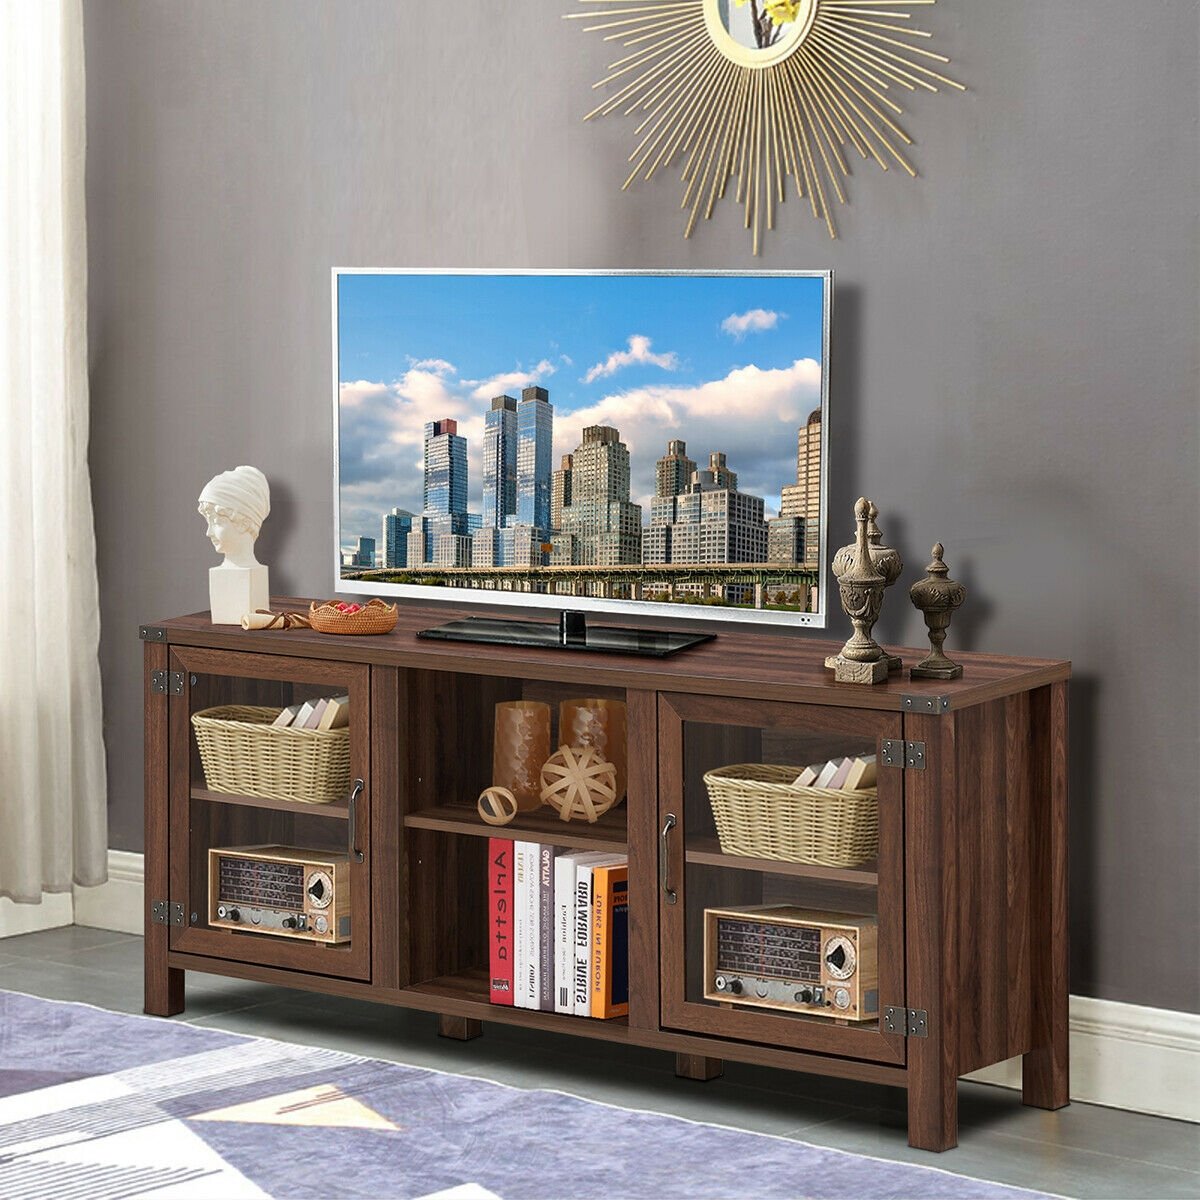 TV Stand Entertainment Center for TV's with Storage Cabinets, Walnut - Gallery Canada